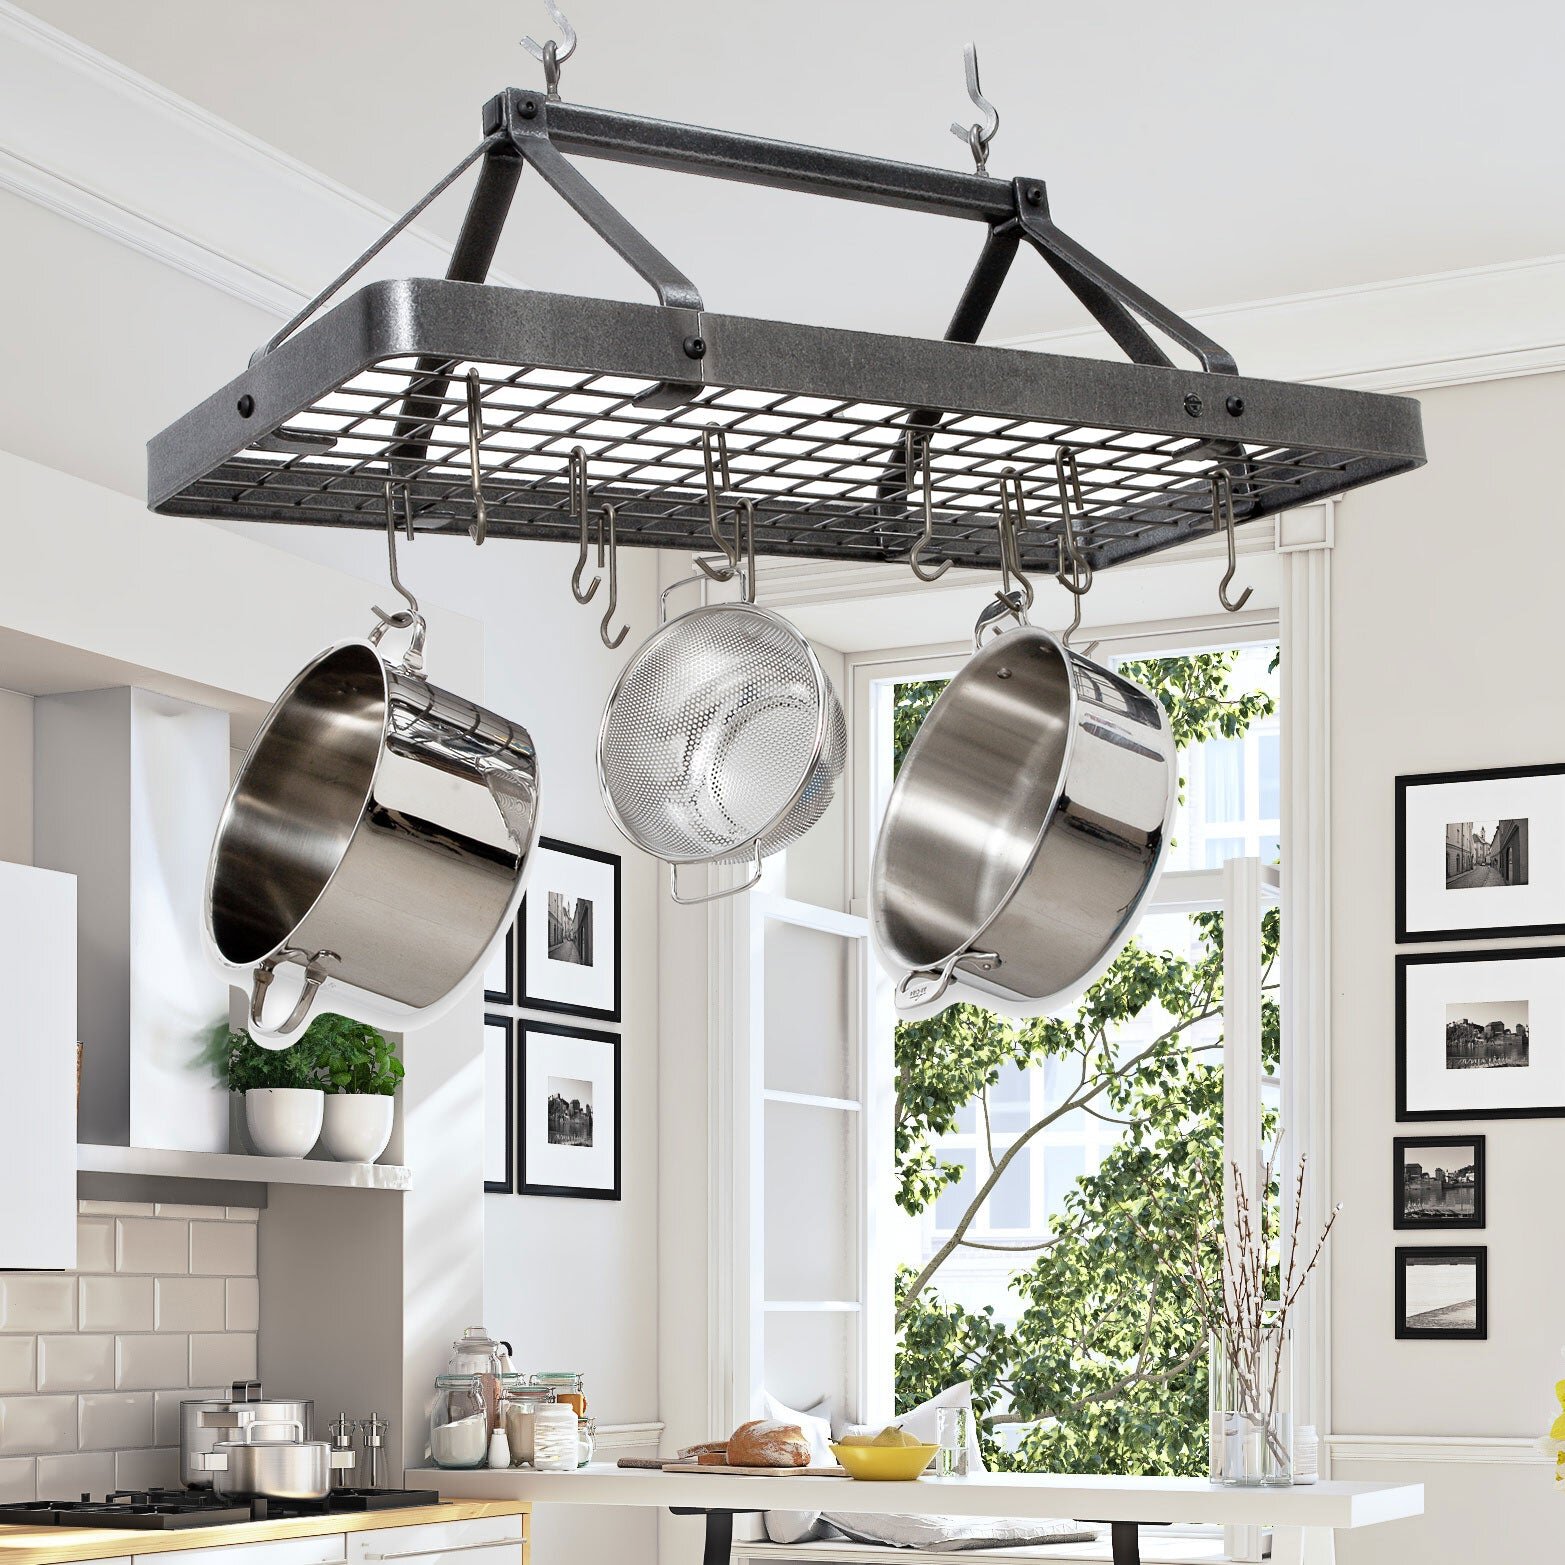 Hanging Pot Racks, Oval Stainless Steel Pot And Pan Rack For Ceiling With  Hooks Home Kitchen Storage Rack Multi-Purpose Organizer 